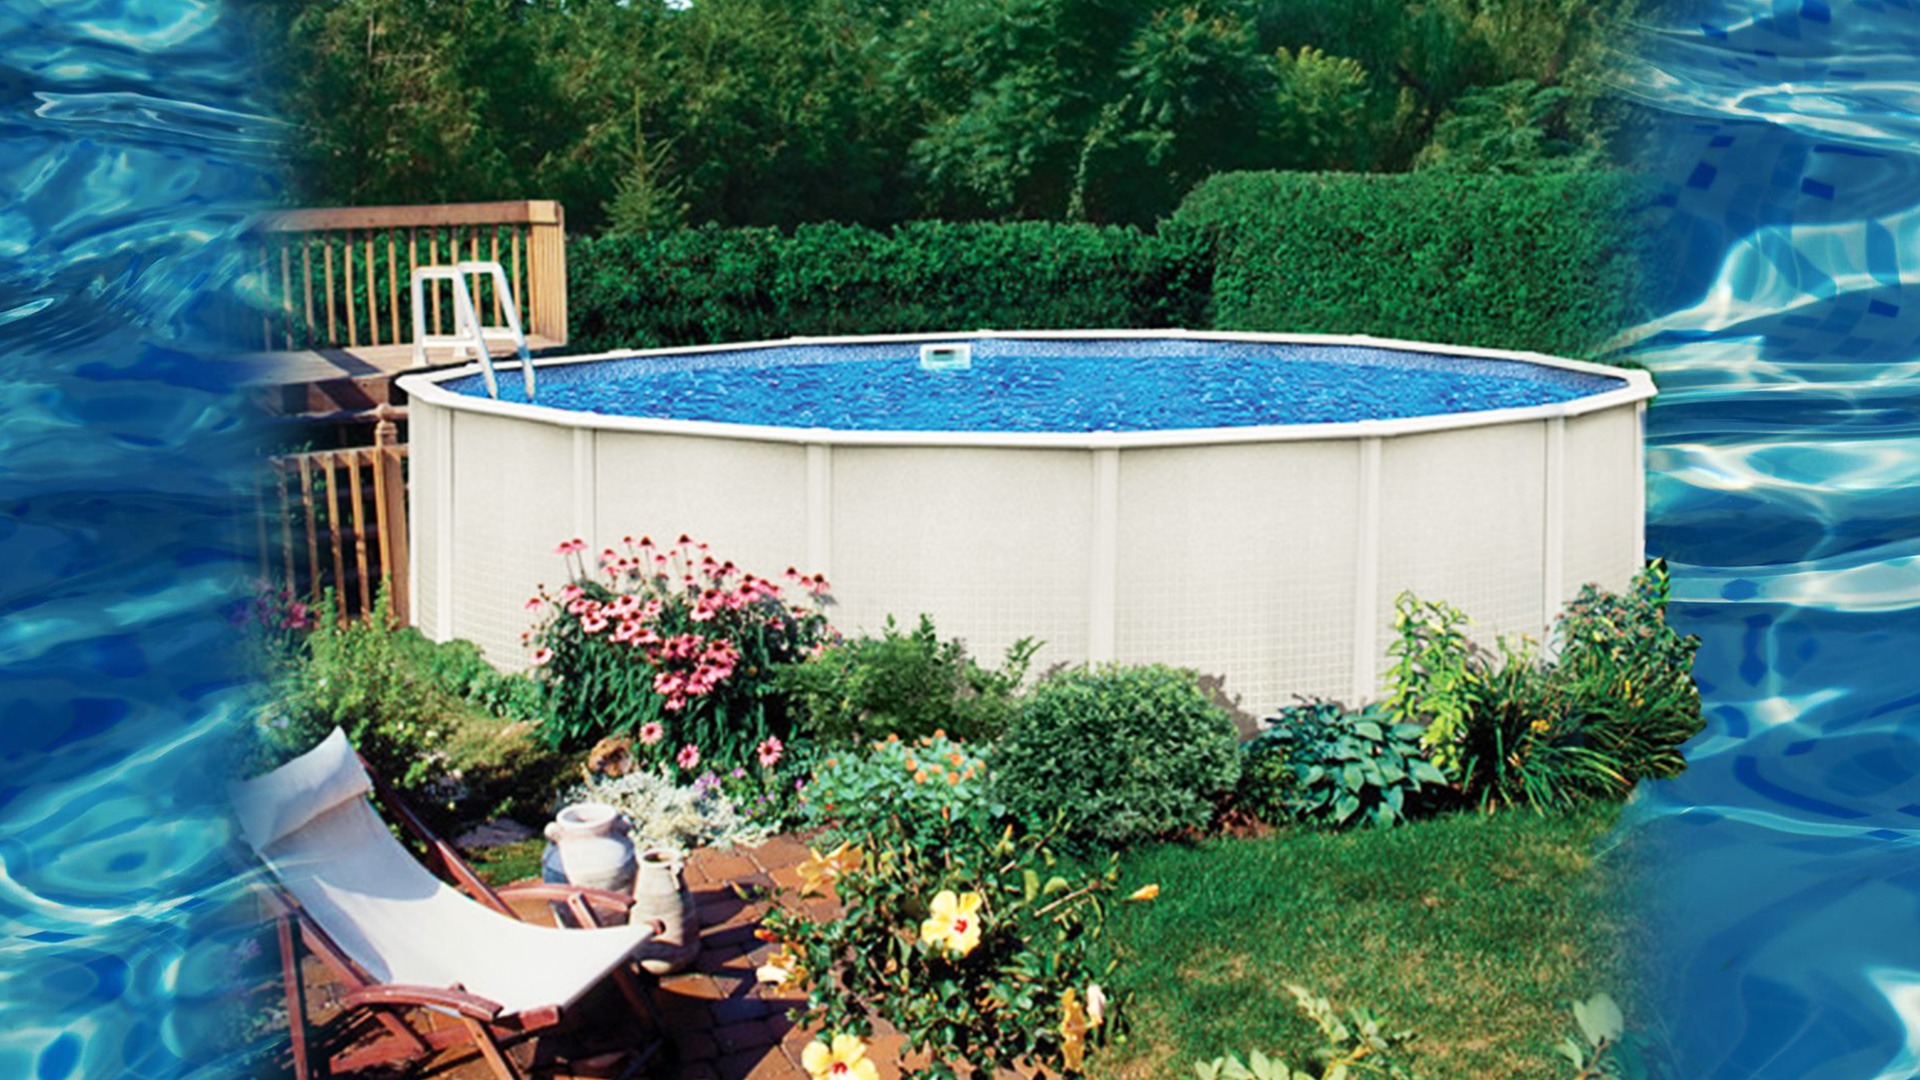 We Specialize In Above Ground Pools